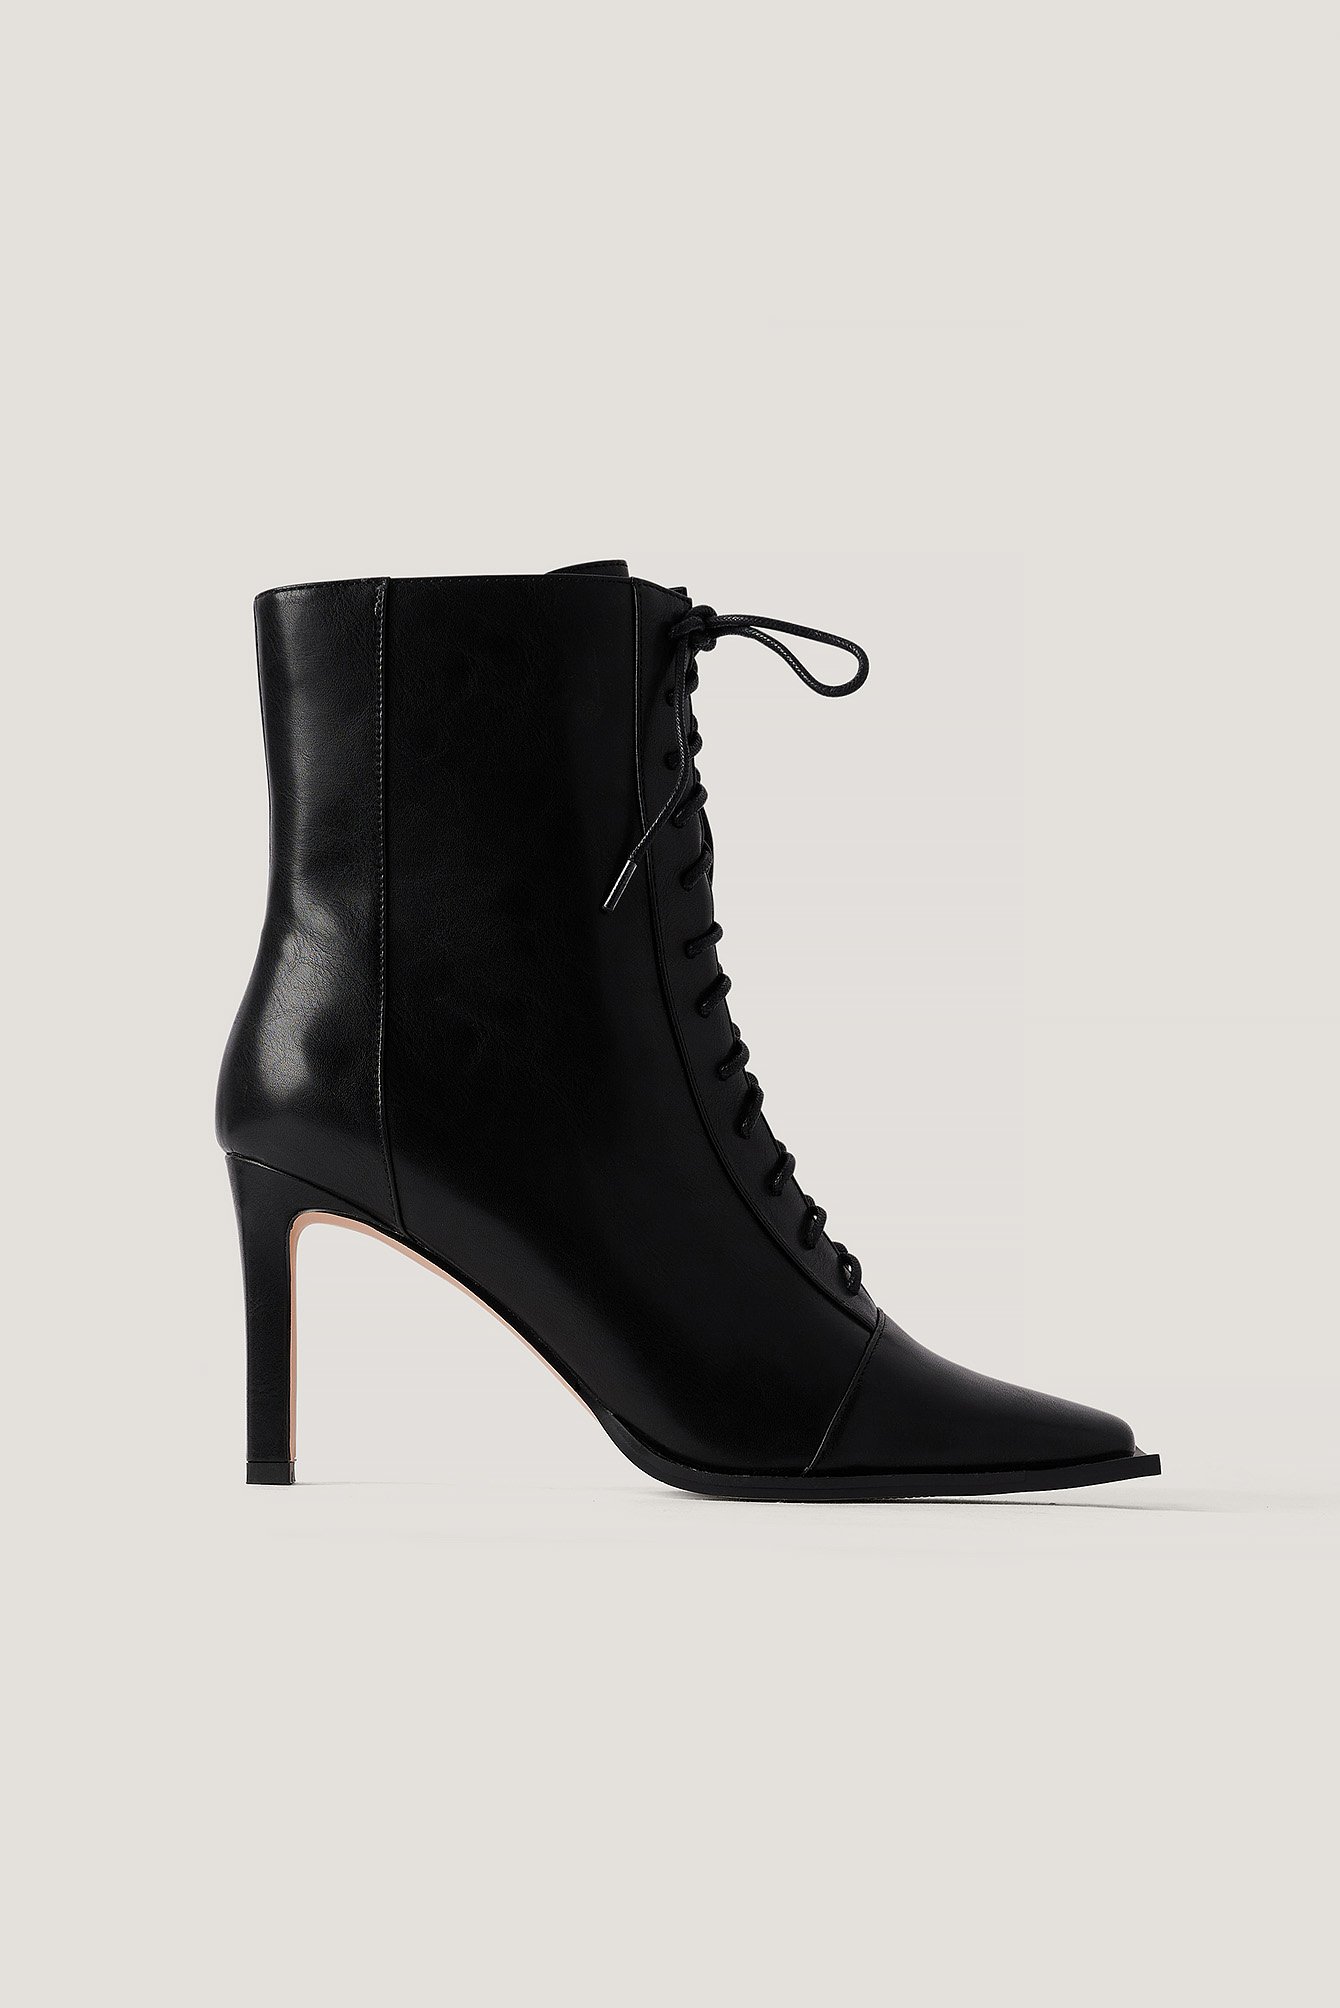 Black Squared Toe Lace Up Boots